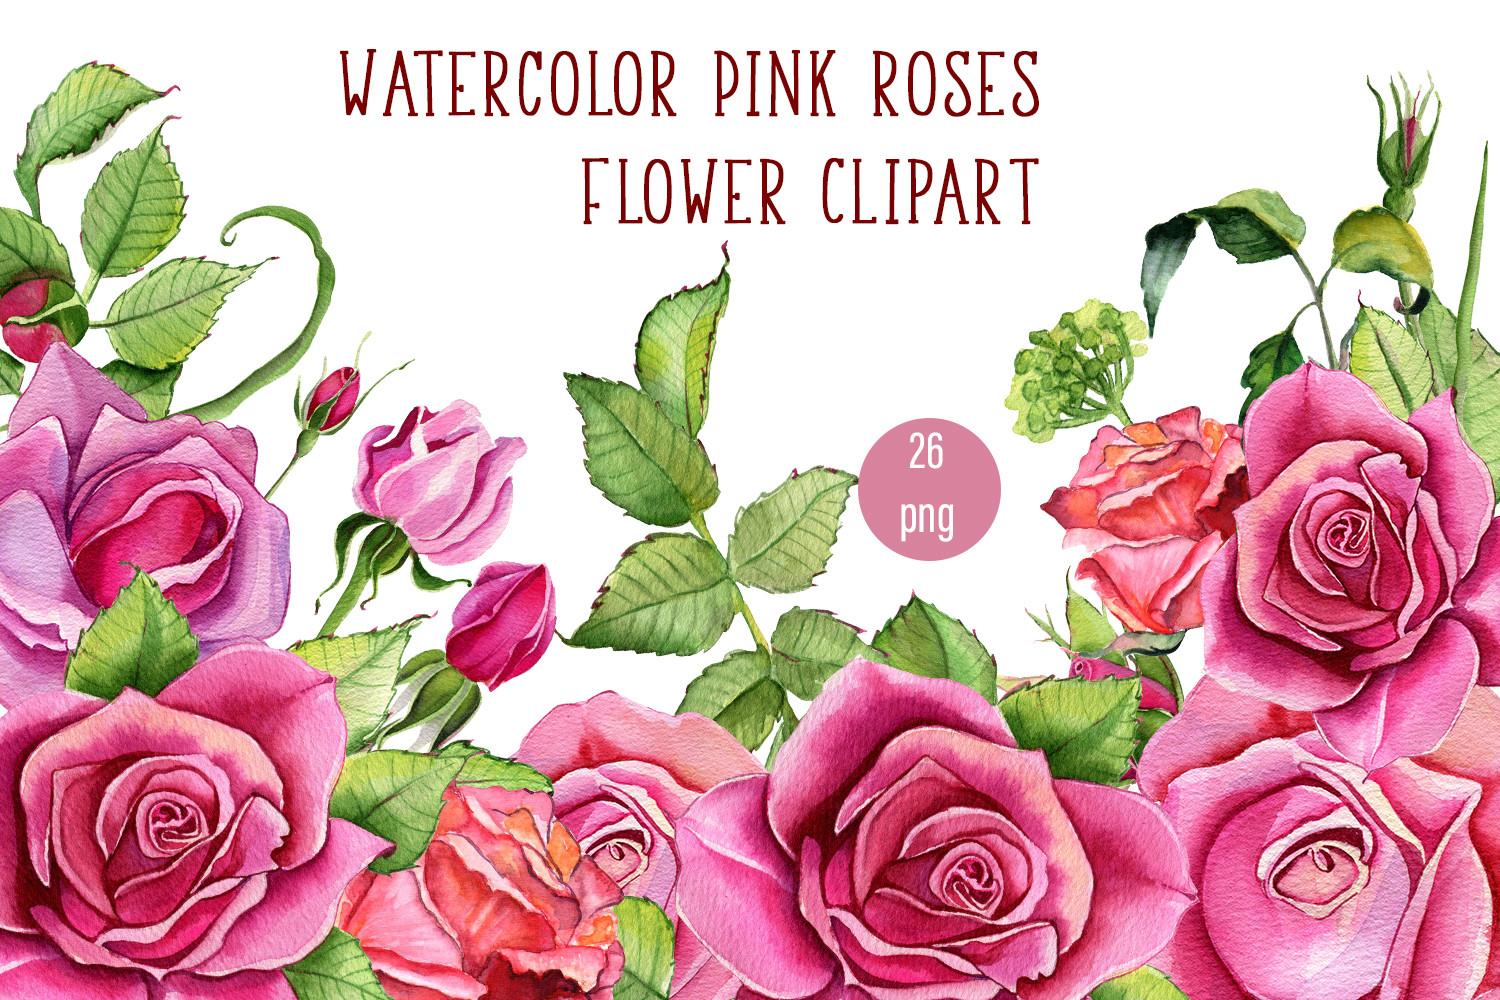 Watercolor Pink Roses Flower Clipart